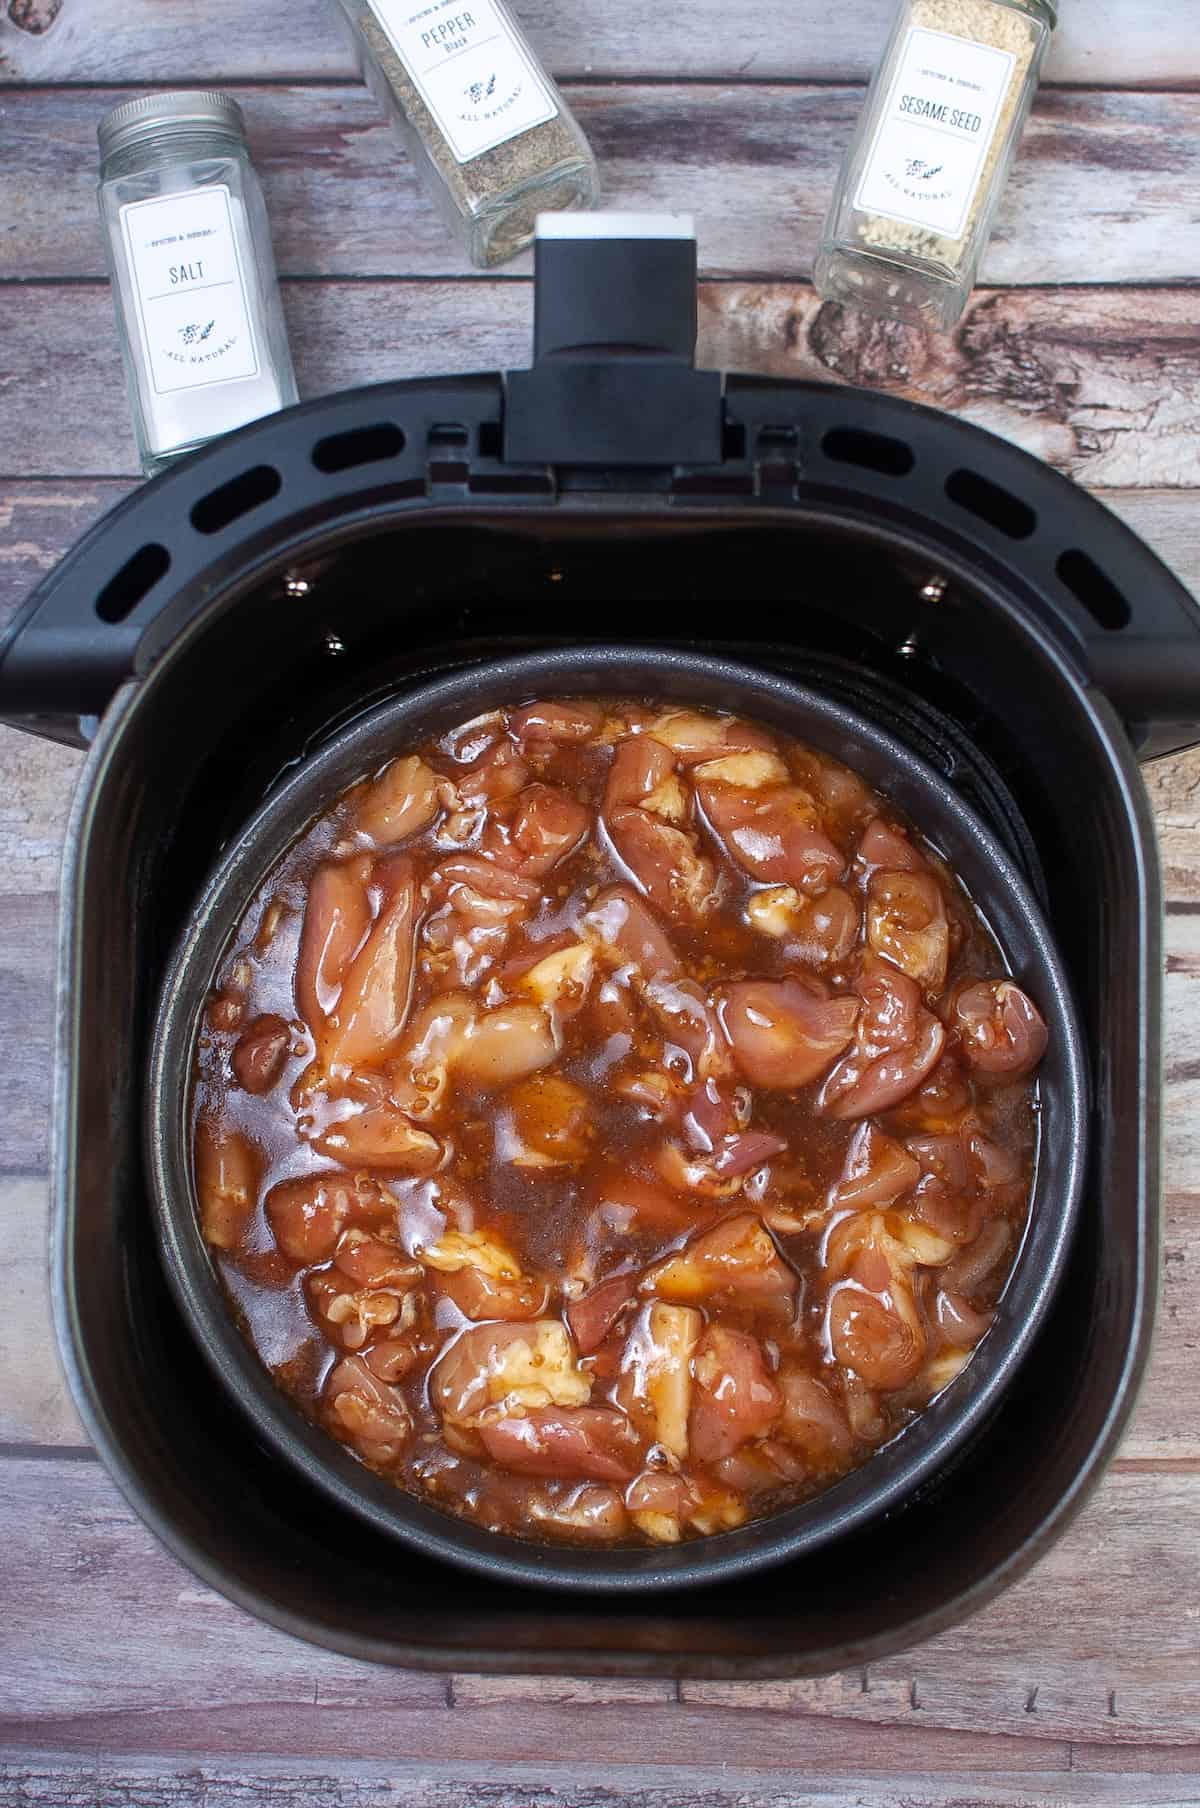 pour the chicken and marinade into a cake pan and place inside the air fryer basket